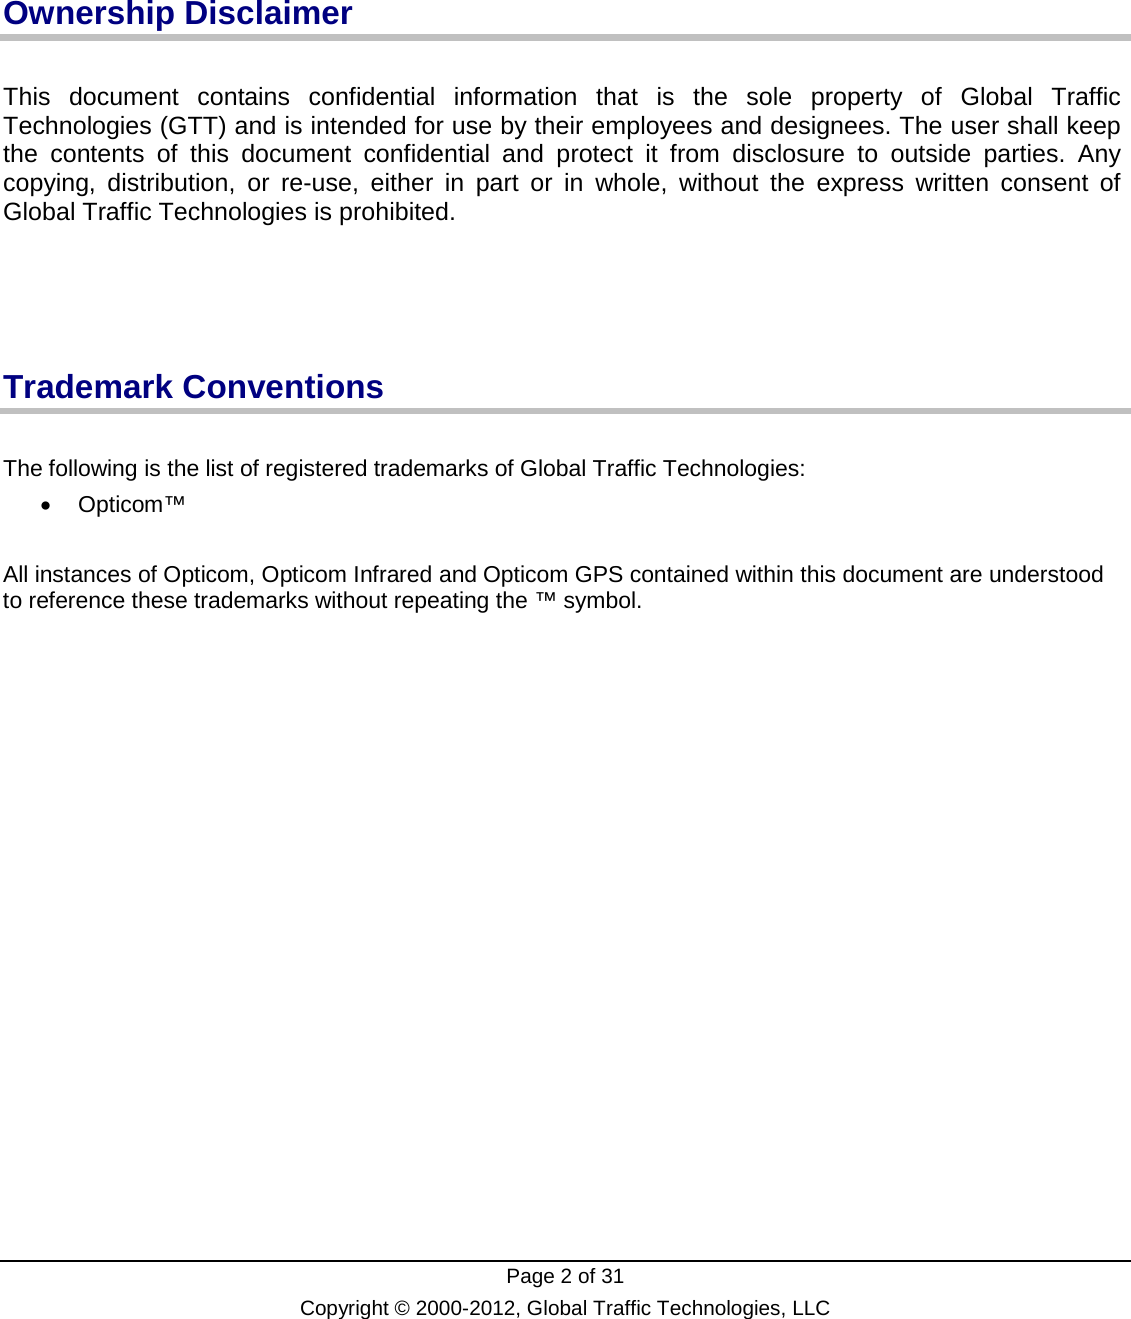  Page 2 of 31 Copyright © 2000-2012, Global Traffic Technologies, LLC    Ownership Disclaimer  This document contains confidential information that is the sole property of Global Traffic Technologies (GTT) and is intended for use by their employees and designees. The user shall keep the contents of this document confidential and protect it from disclosure to outside parties. Any copying, distribution, or re-use, either in part or in whole, without the express written consent of Global Traffic Technologies is prohibited.     Trademark Conventions  The following is the list of registered trademarks of Global Traffic Technologies: • Opticom™  All instances of Opticom, Opticom Infrared and Opticom GPS contained within this document are understood to reference these trademarks without repeating the ™ symbol.    